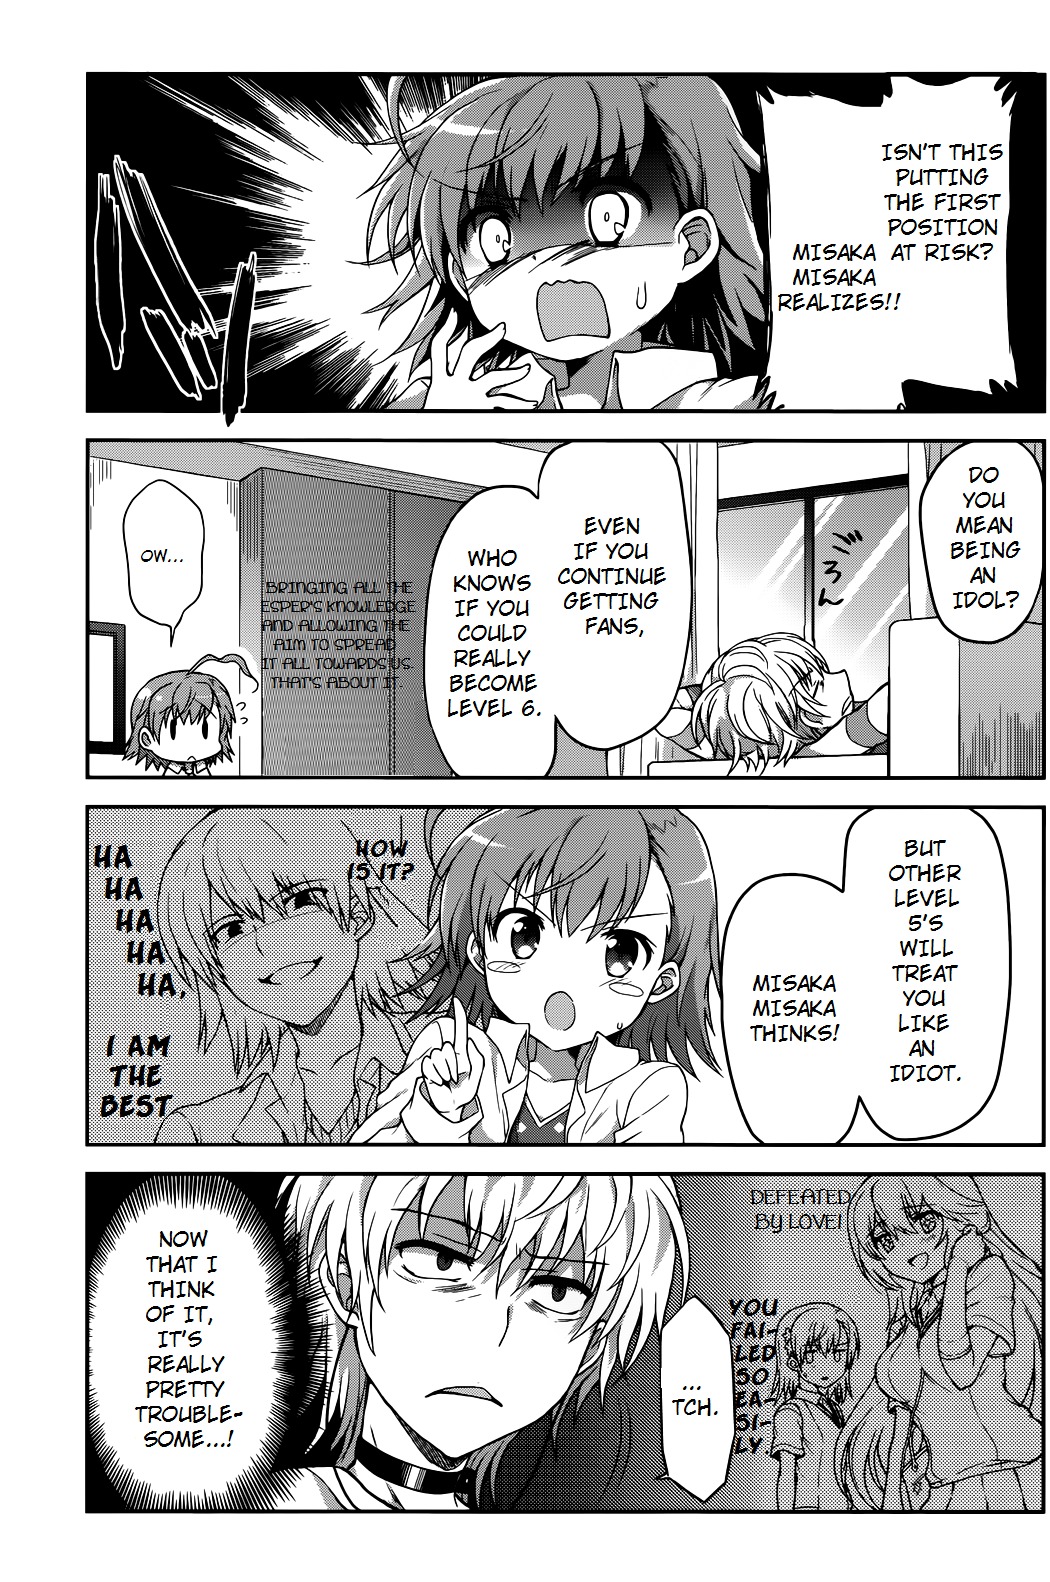 A Certain Idol Accelerator - Page 3